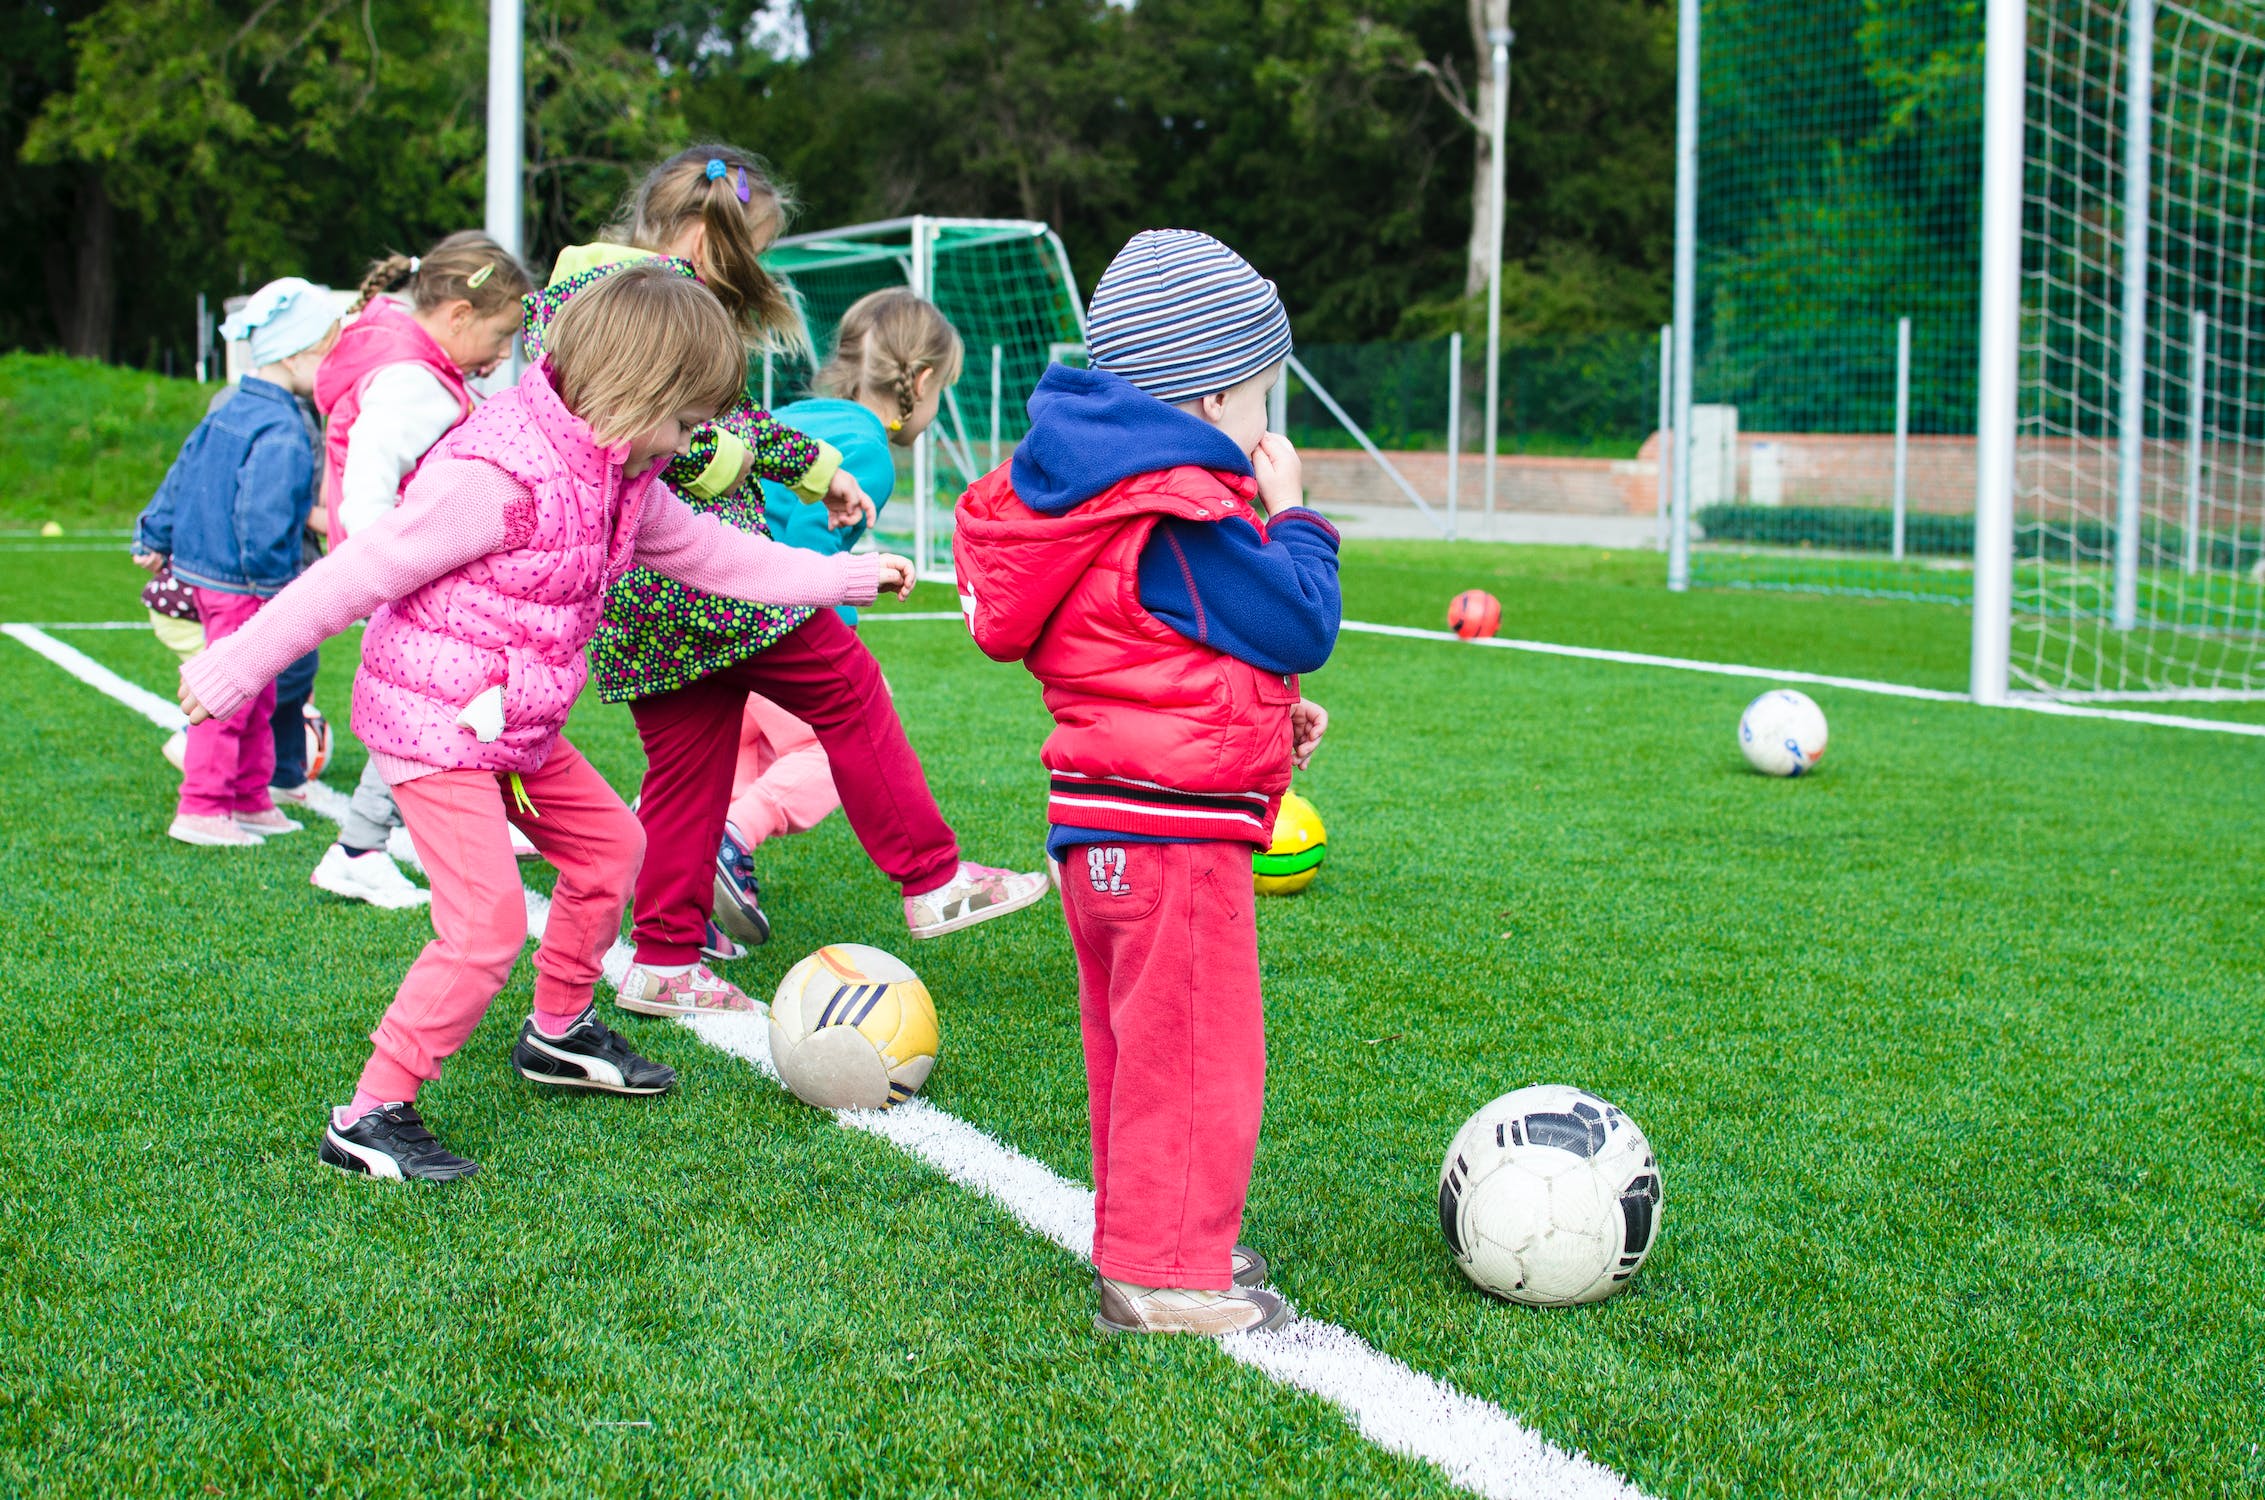 Certification for Child Protection in Sports